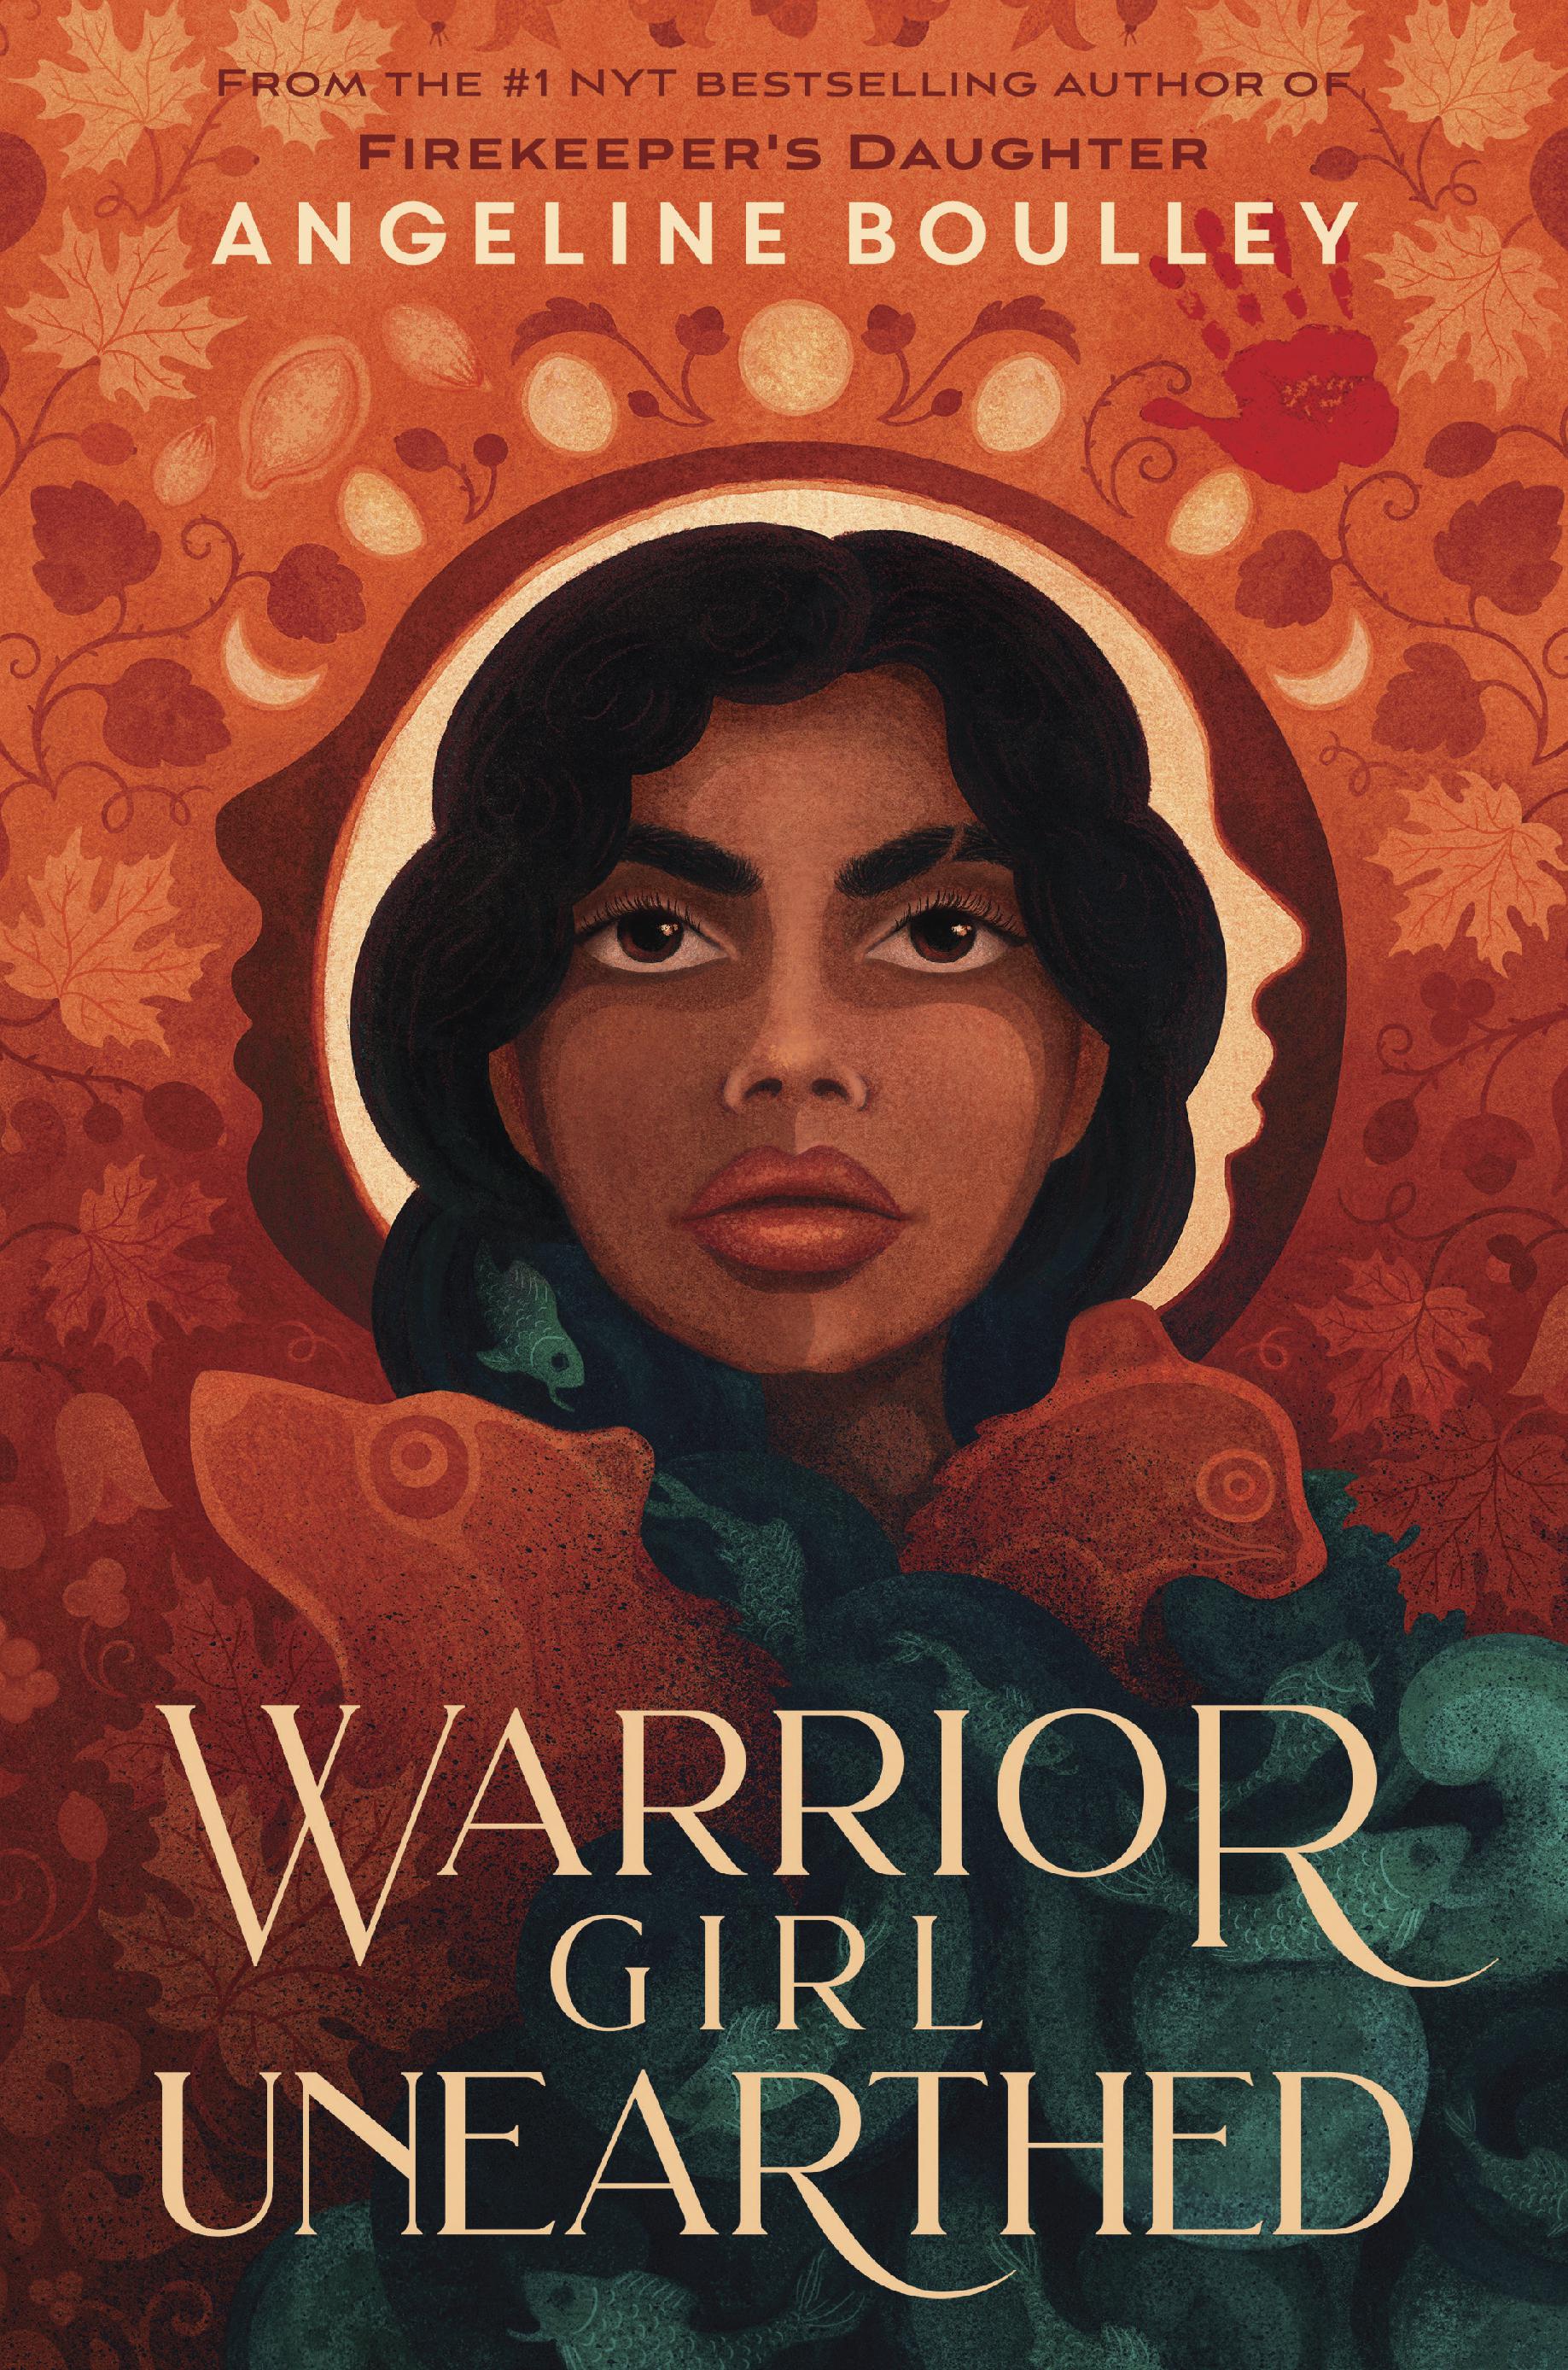 Boulley’s ‘Warrior Girl Unearthed’ to come out in May 2023